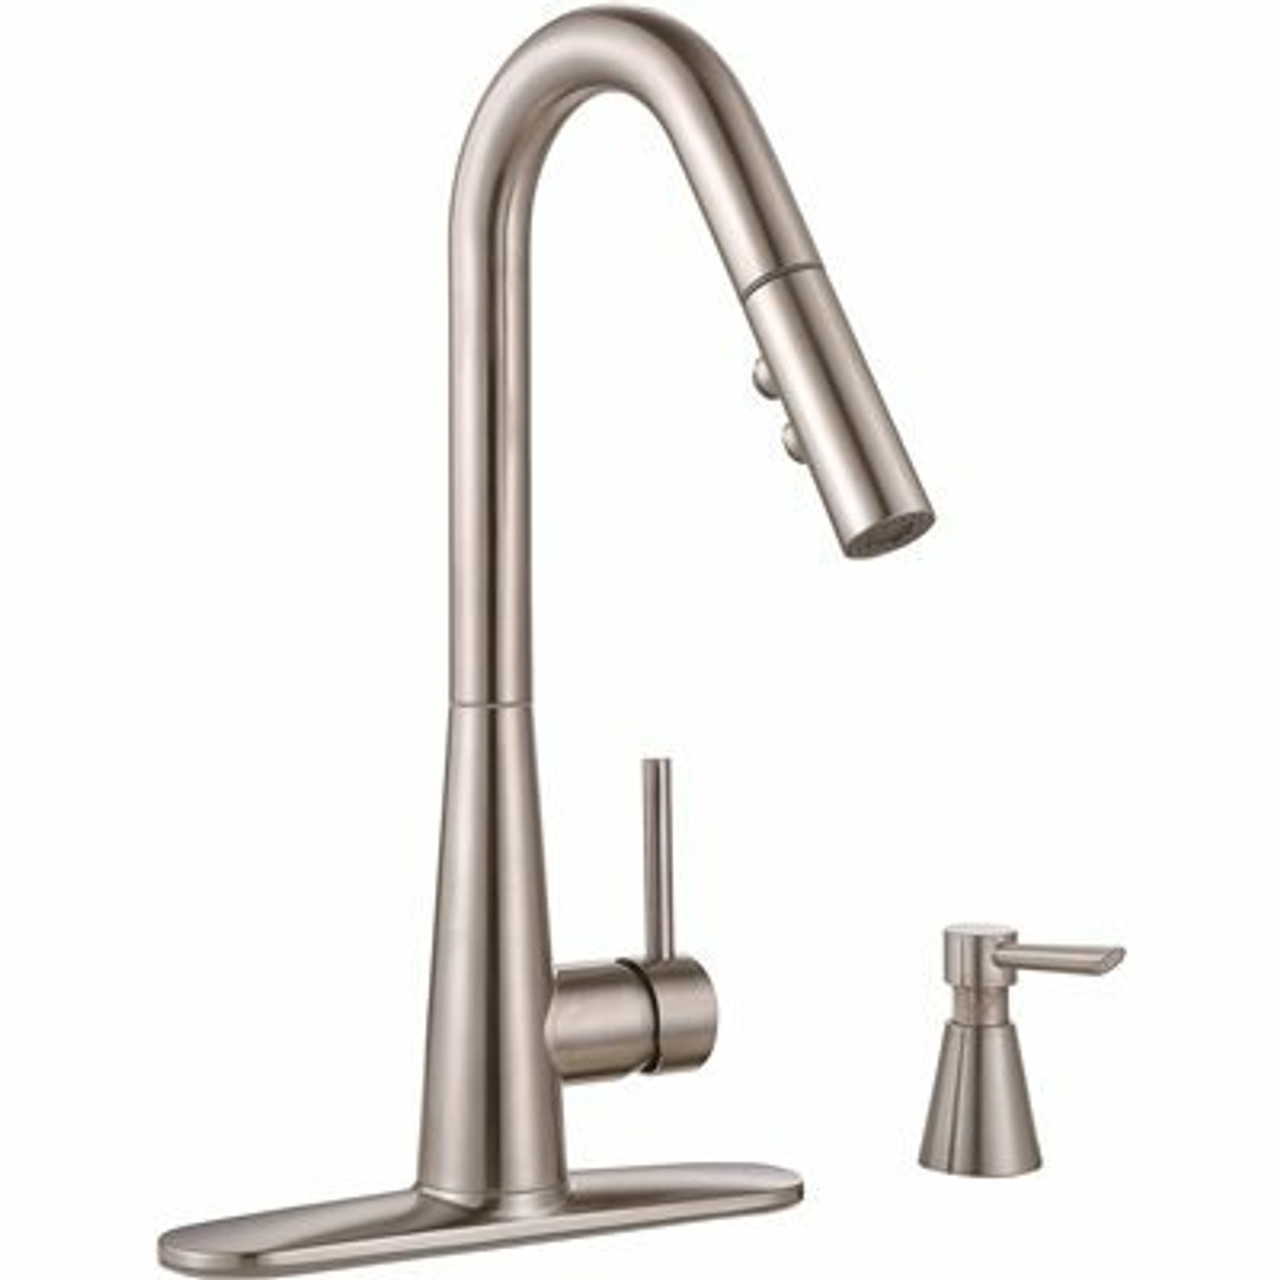 Premier Essen Single-Handle Pull-Down Sprayer Kitchen Faucet With Soap Dispenser In Brushed Nickel